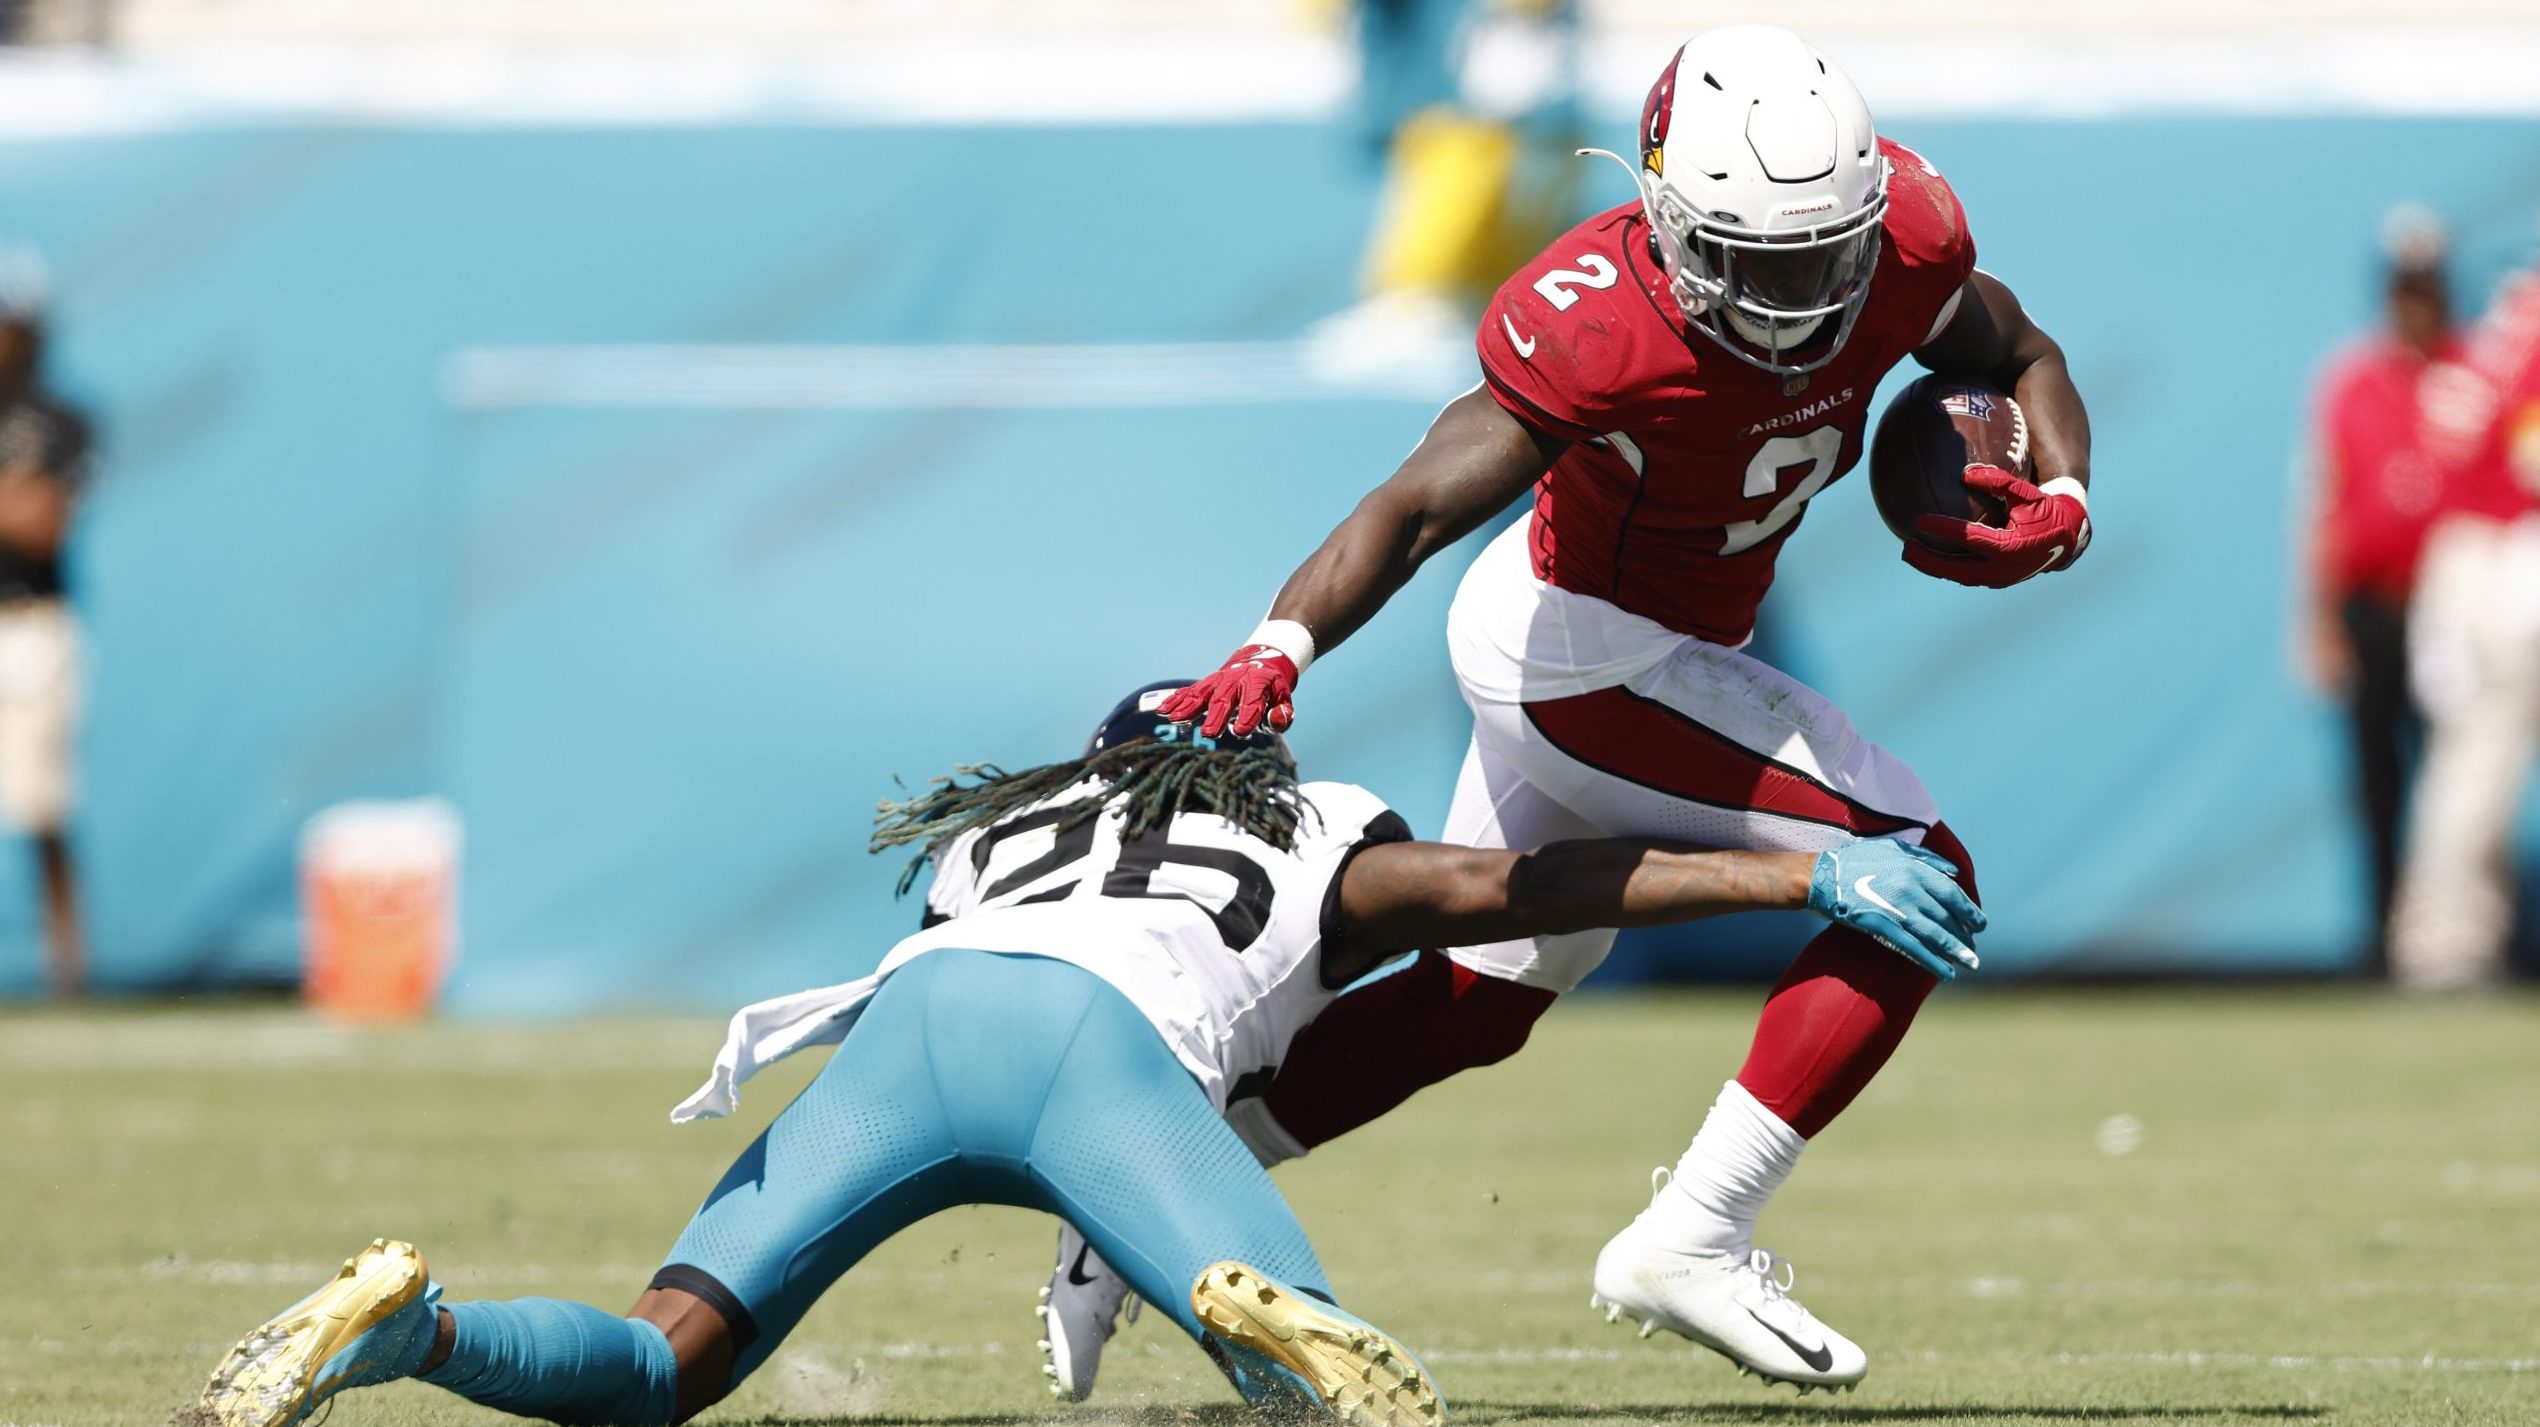 Chase Edmonds #2 of the Arizona Cardinals breaks a tackle by Shaquill Griffin #26 of the Jacksonvil...